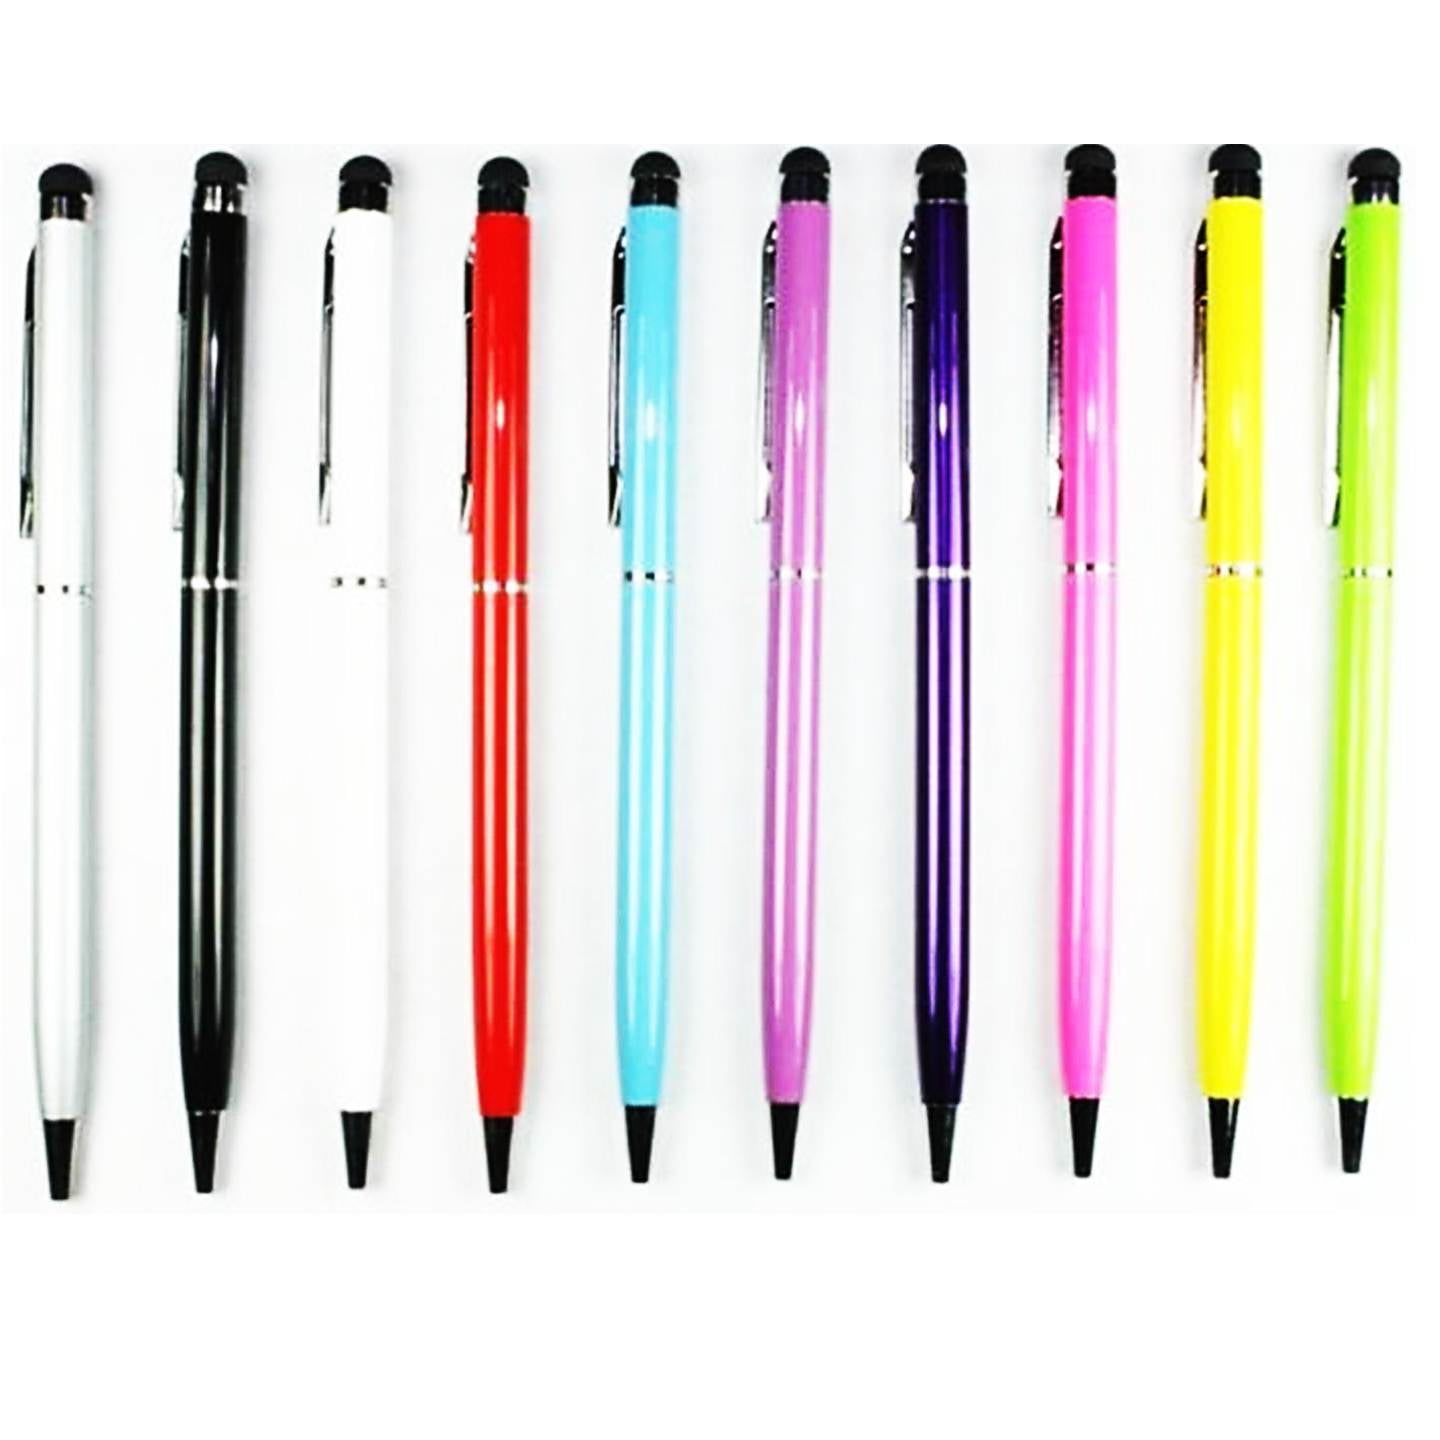 2 in 1 Universal Touch Screen Stylus Ballpoint Pen For iPhone iPad Smartphone PC 